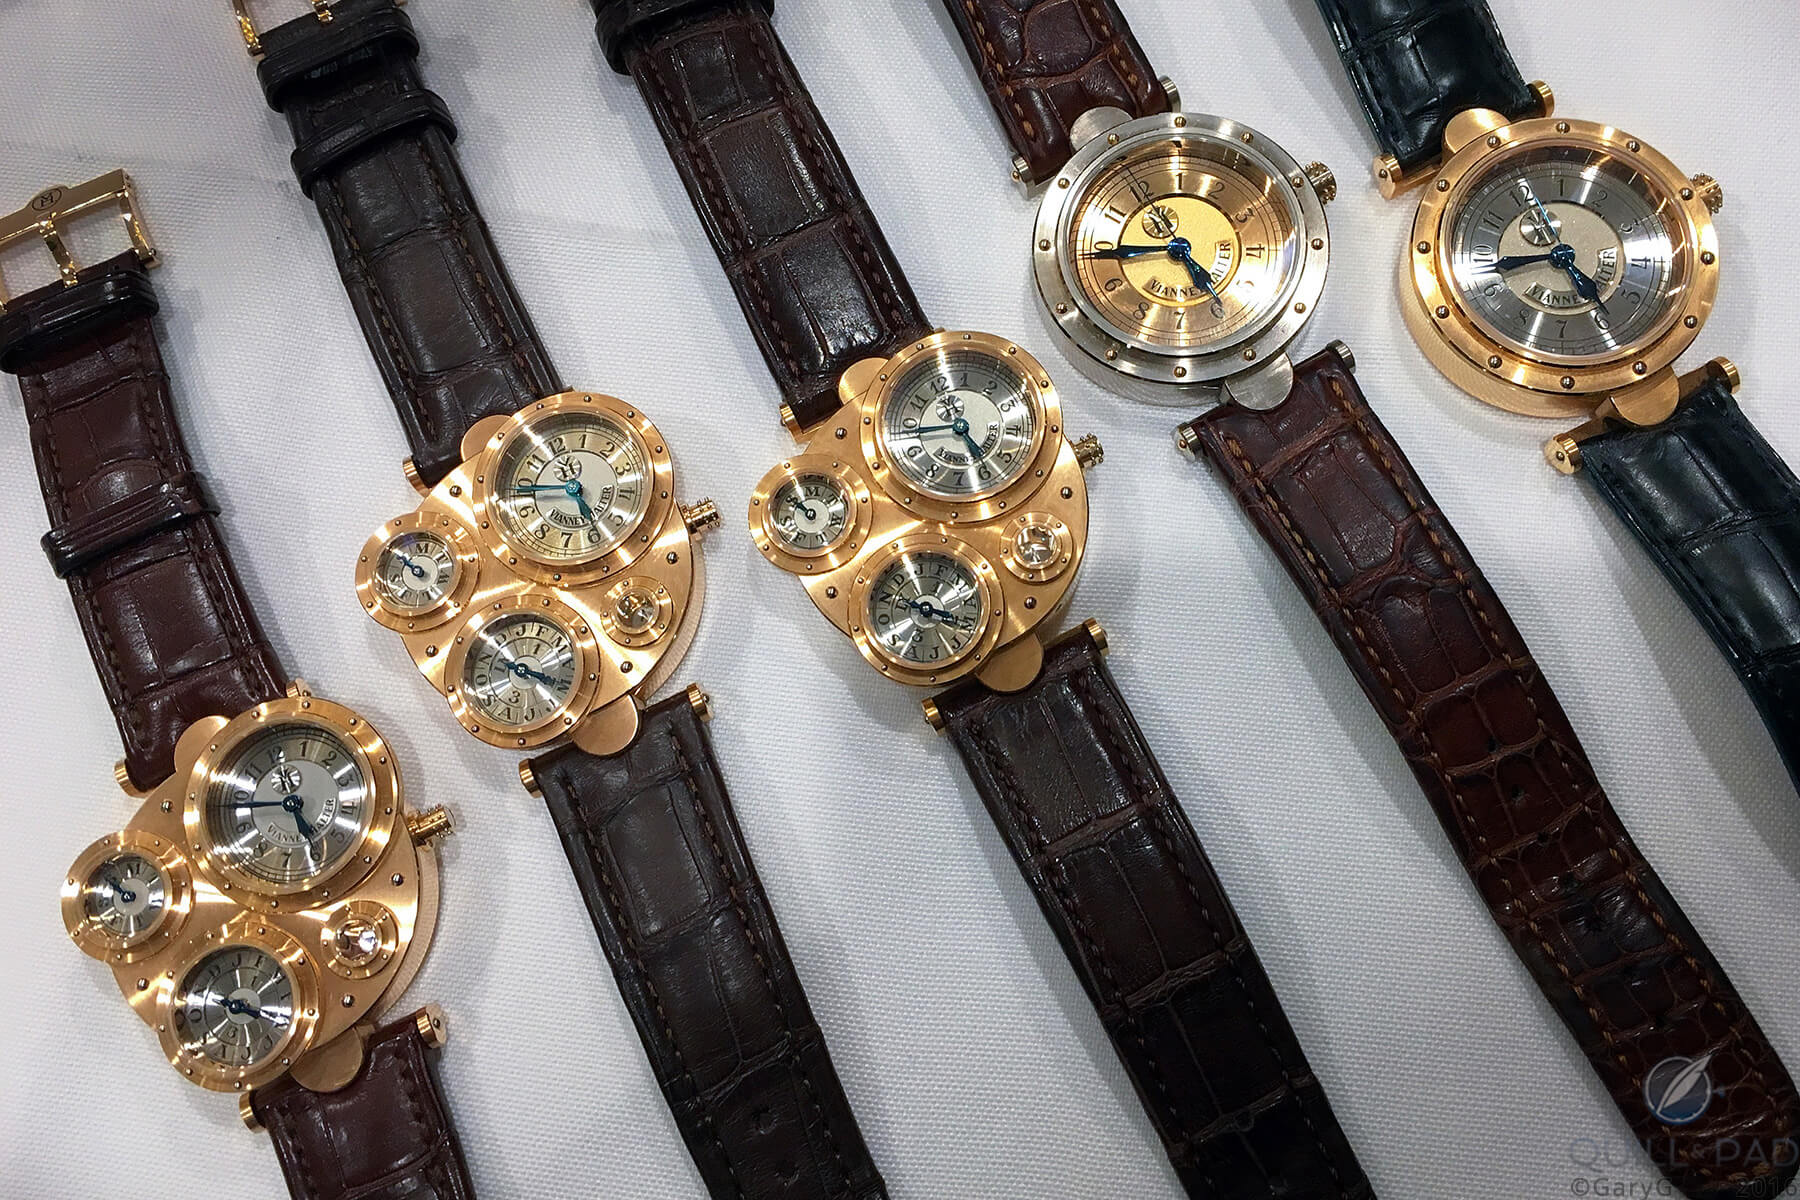 Table scene at a recent watch dinner, including three of the 36 Vianney Halter Antiquas made in pink gold